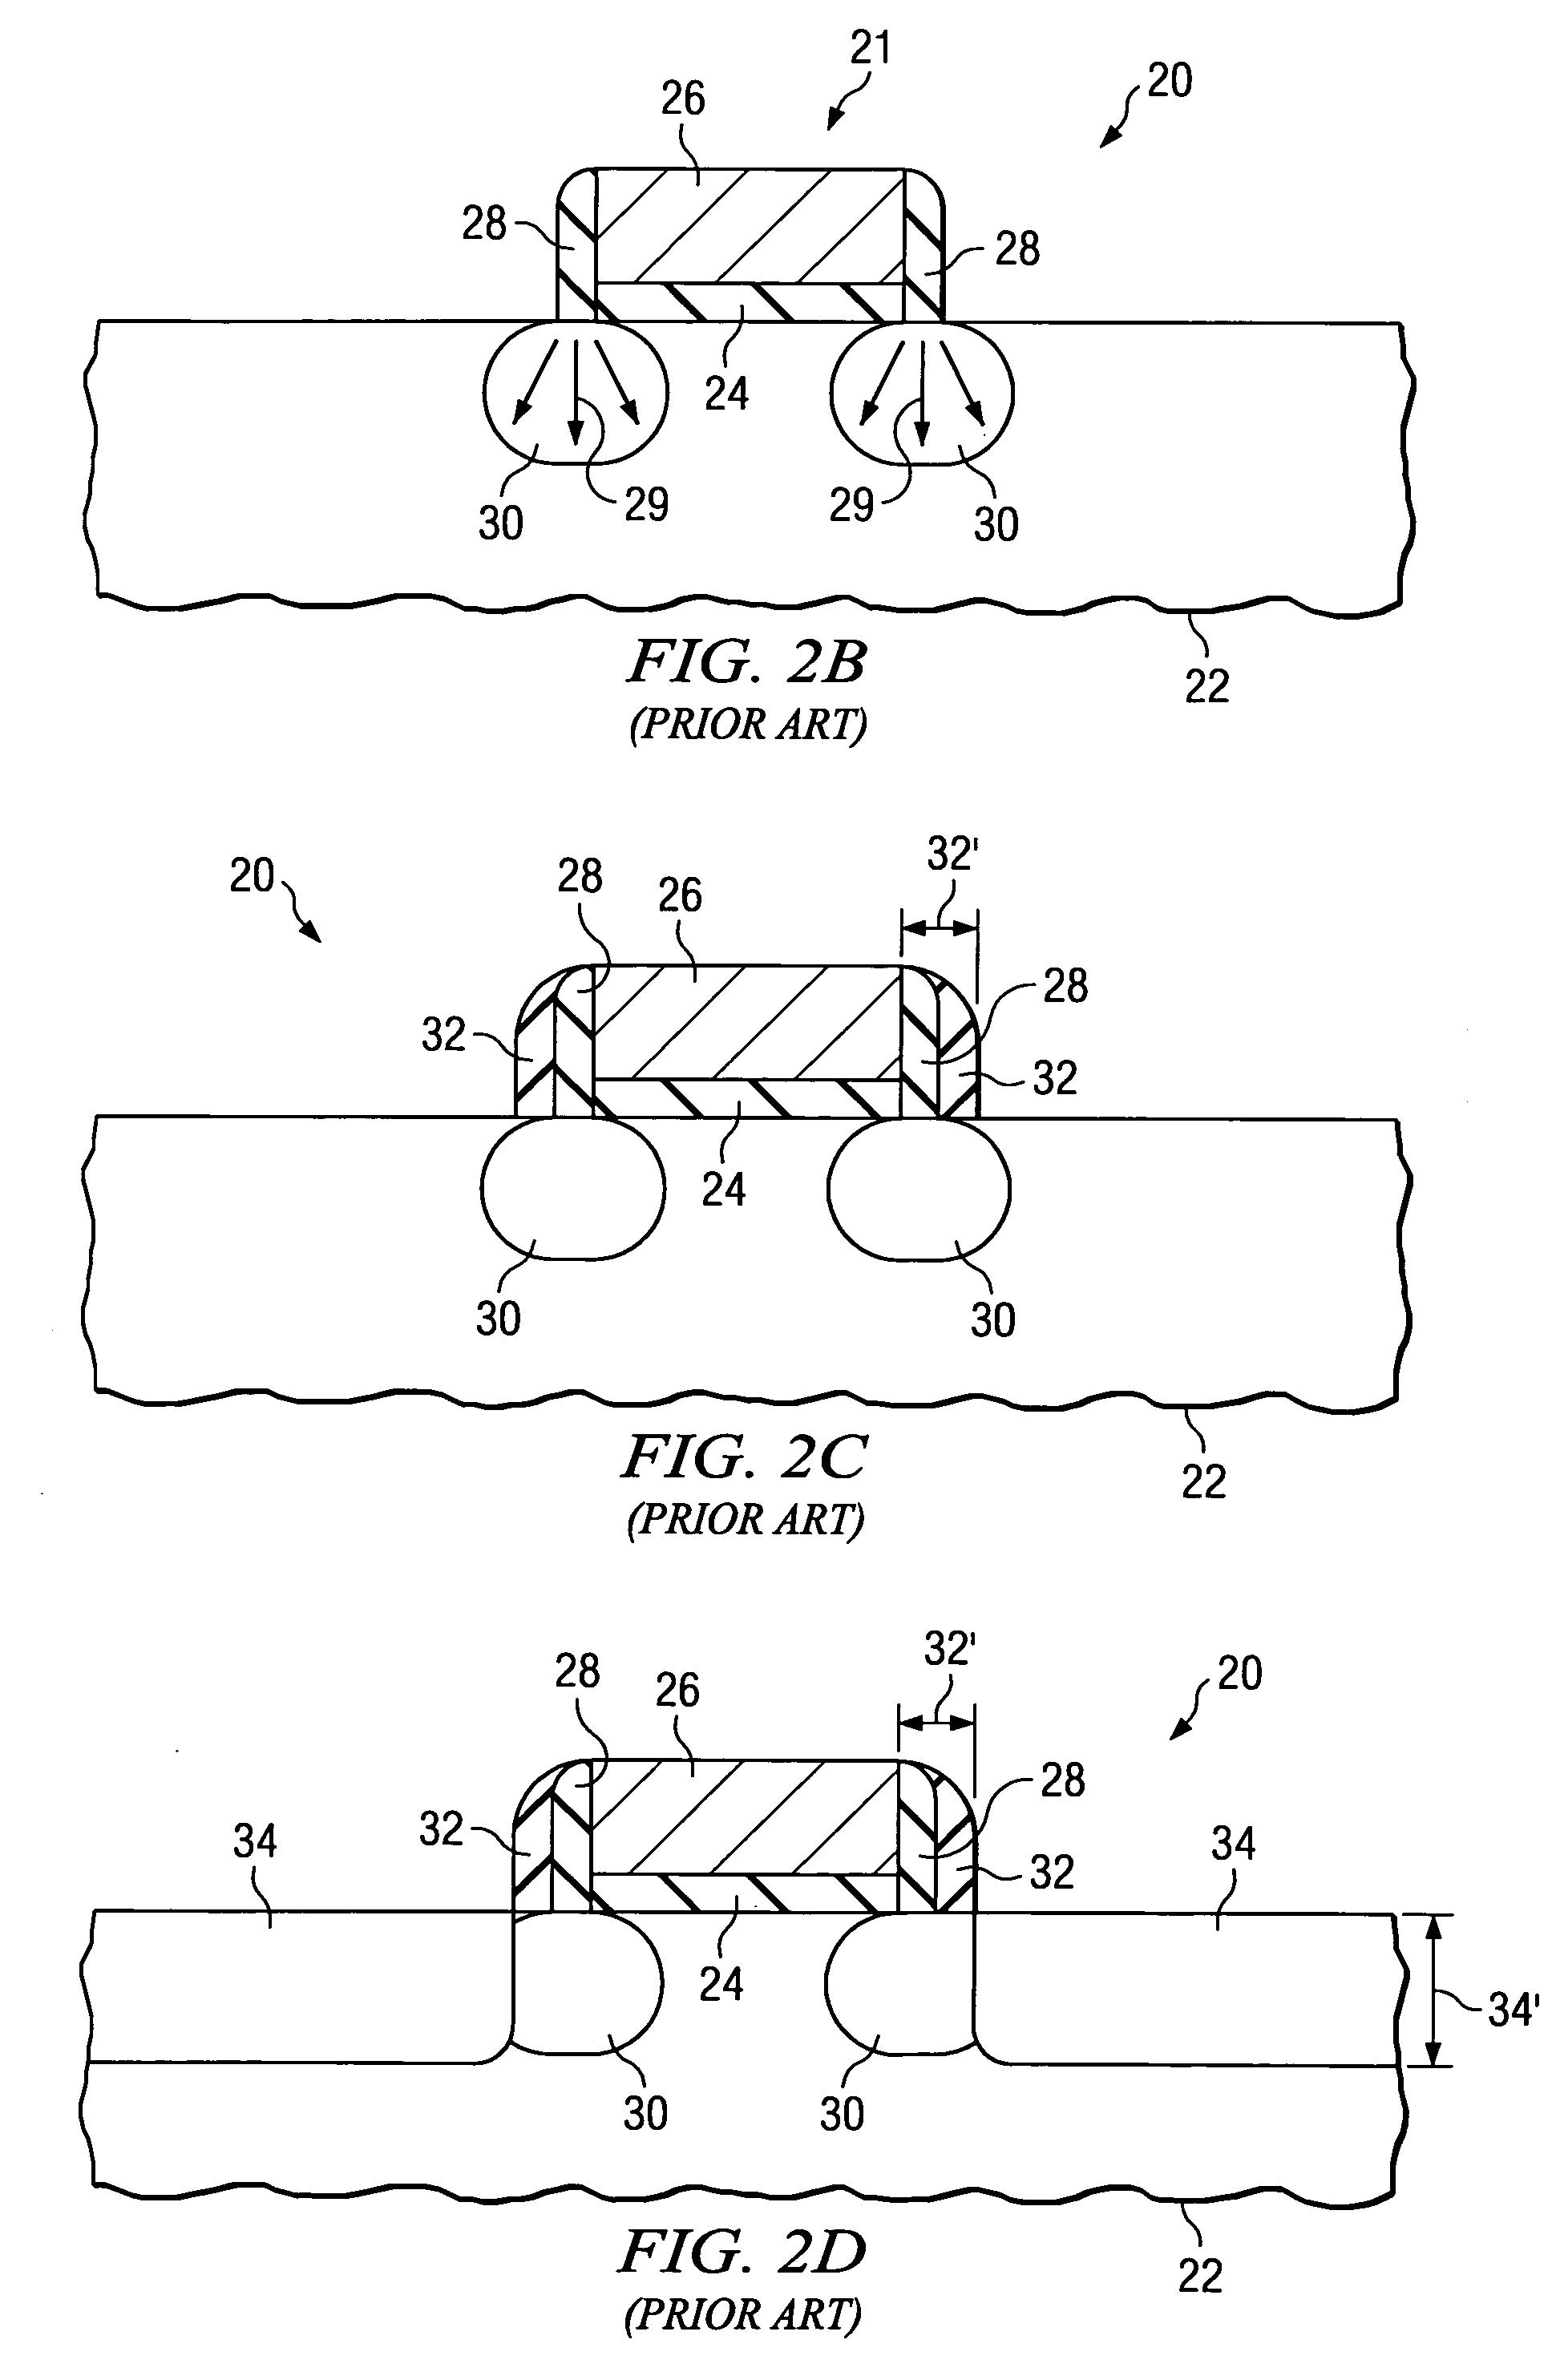 Method to produce localized halo for MOS transistor